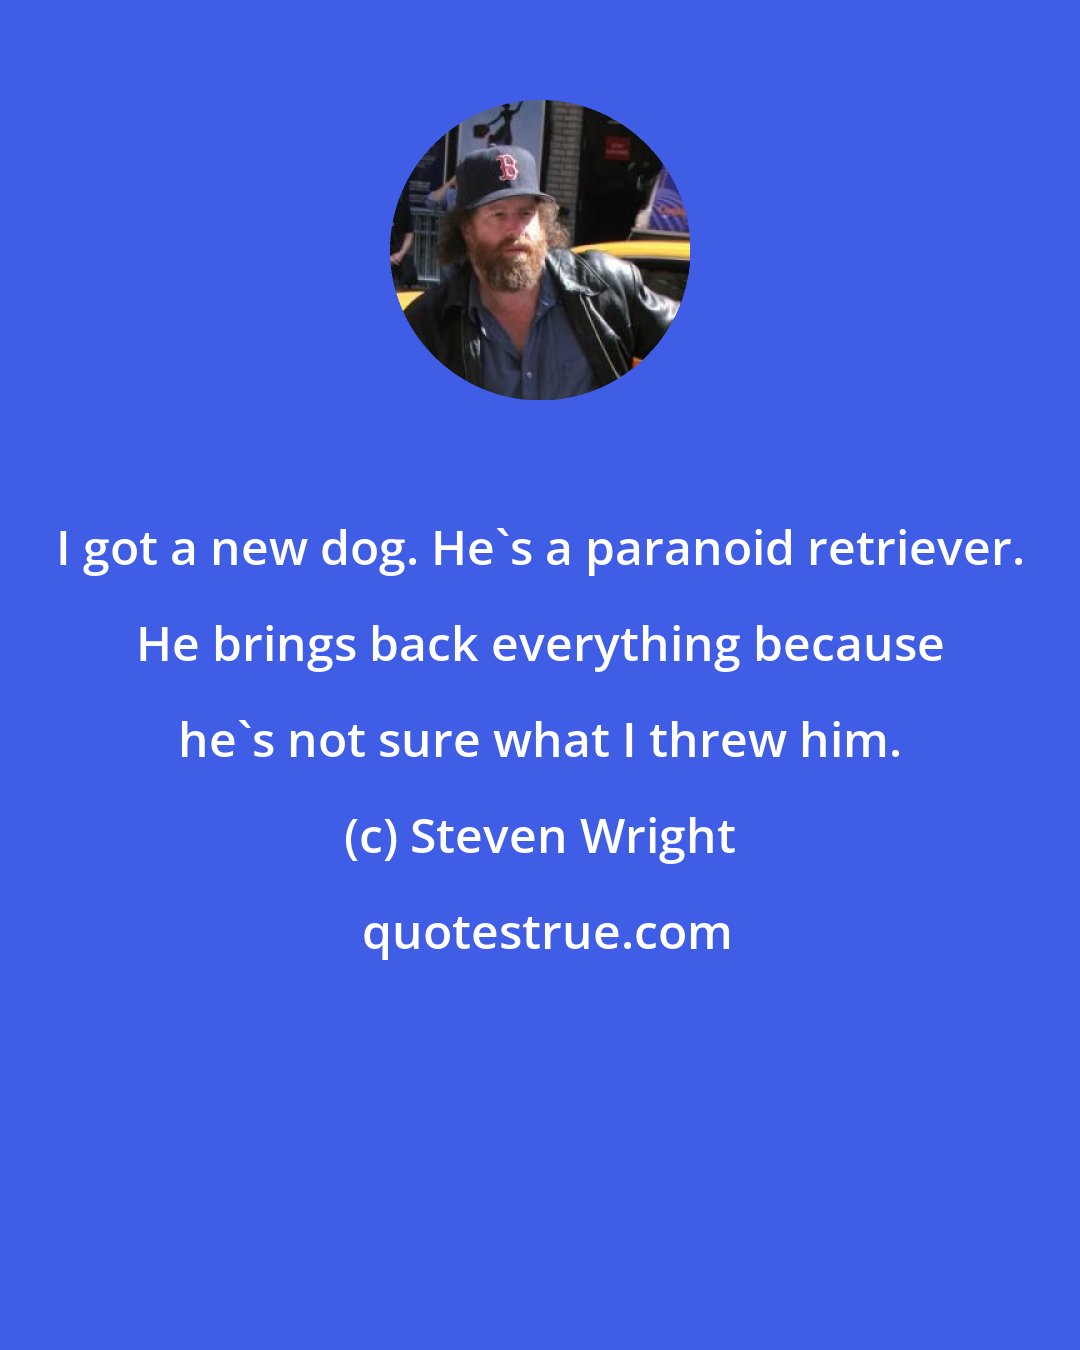 Steven Wright: I got a new dog. He's a paranoid retriever. He brings back everything because he's not sure what I threw him.